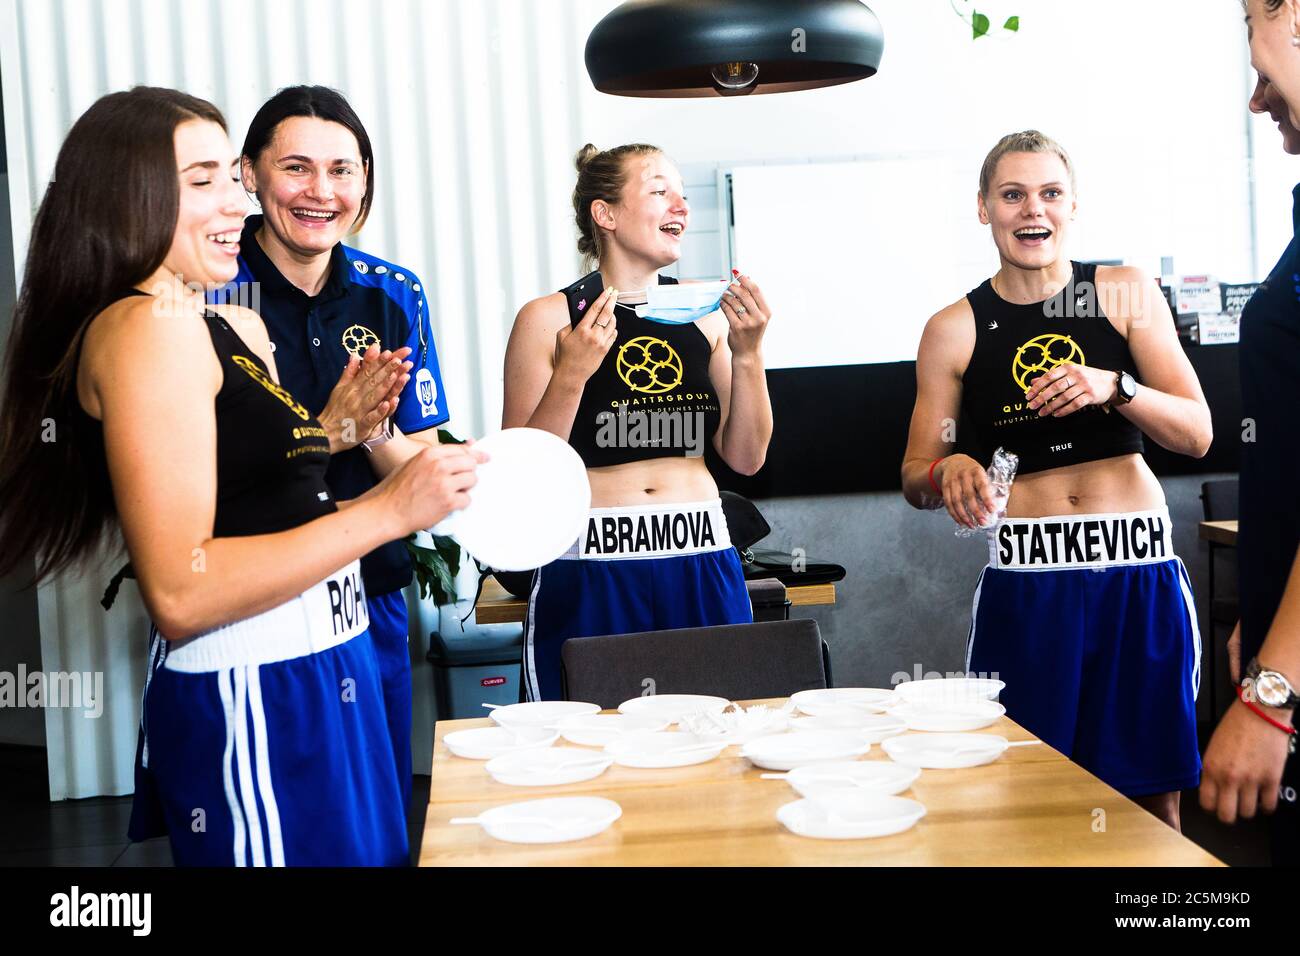 Ukrainian Women's Boxing League, Katya Rogova(L),Inna Statkevich(R) celebrate Inna's 25yrs after successfully weighing out on 30 July in Kiev Sparta Stock Photo